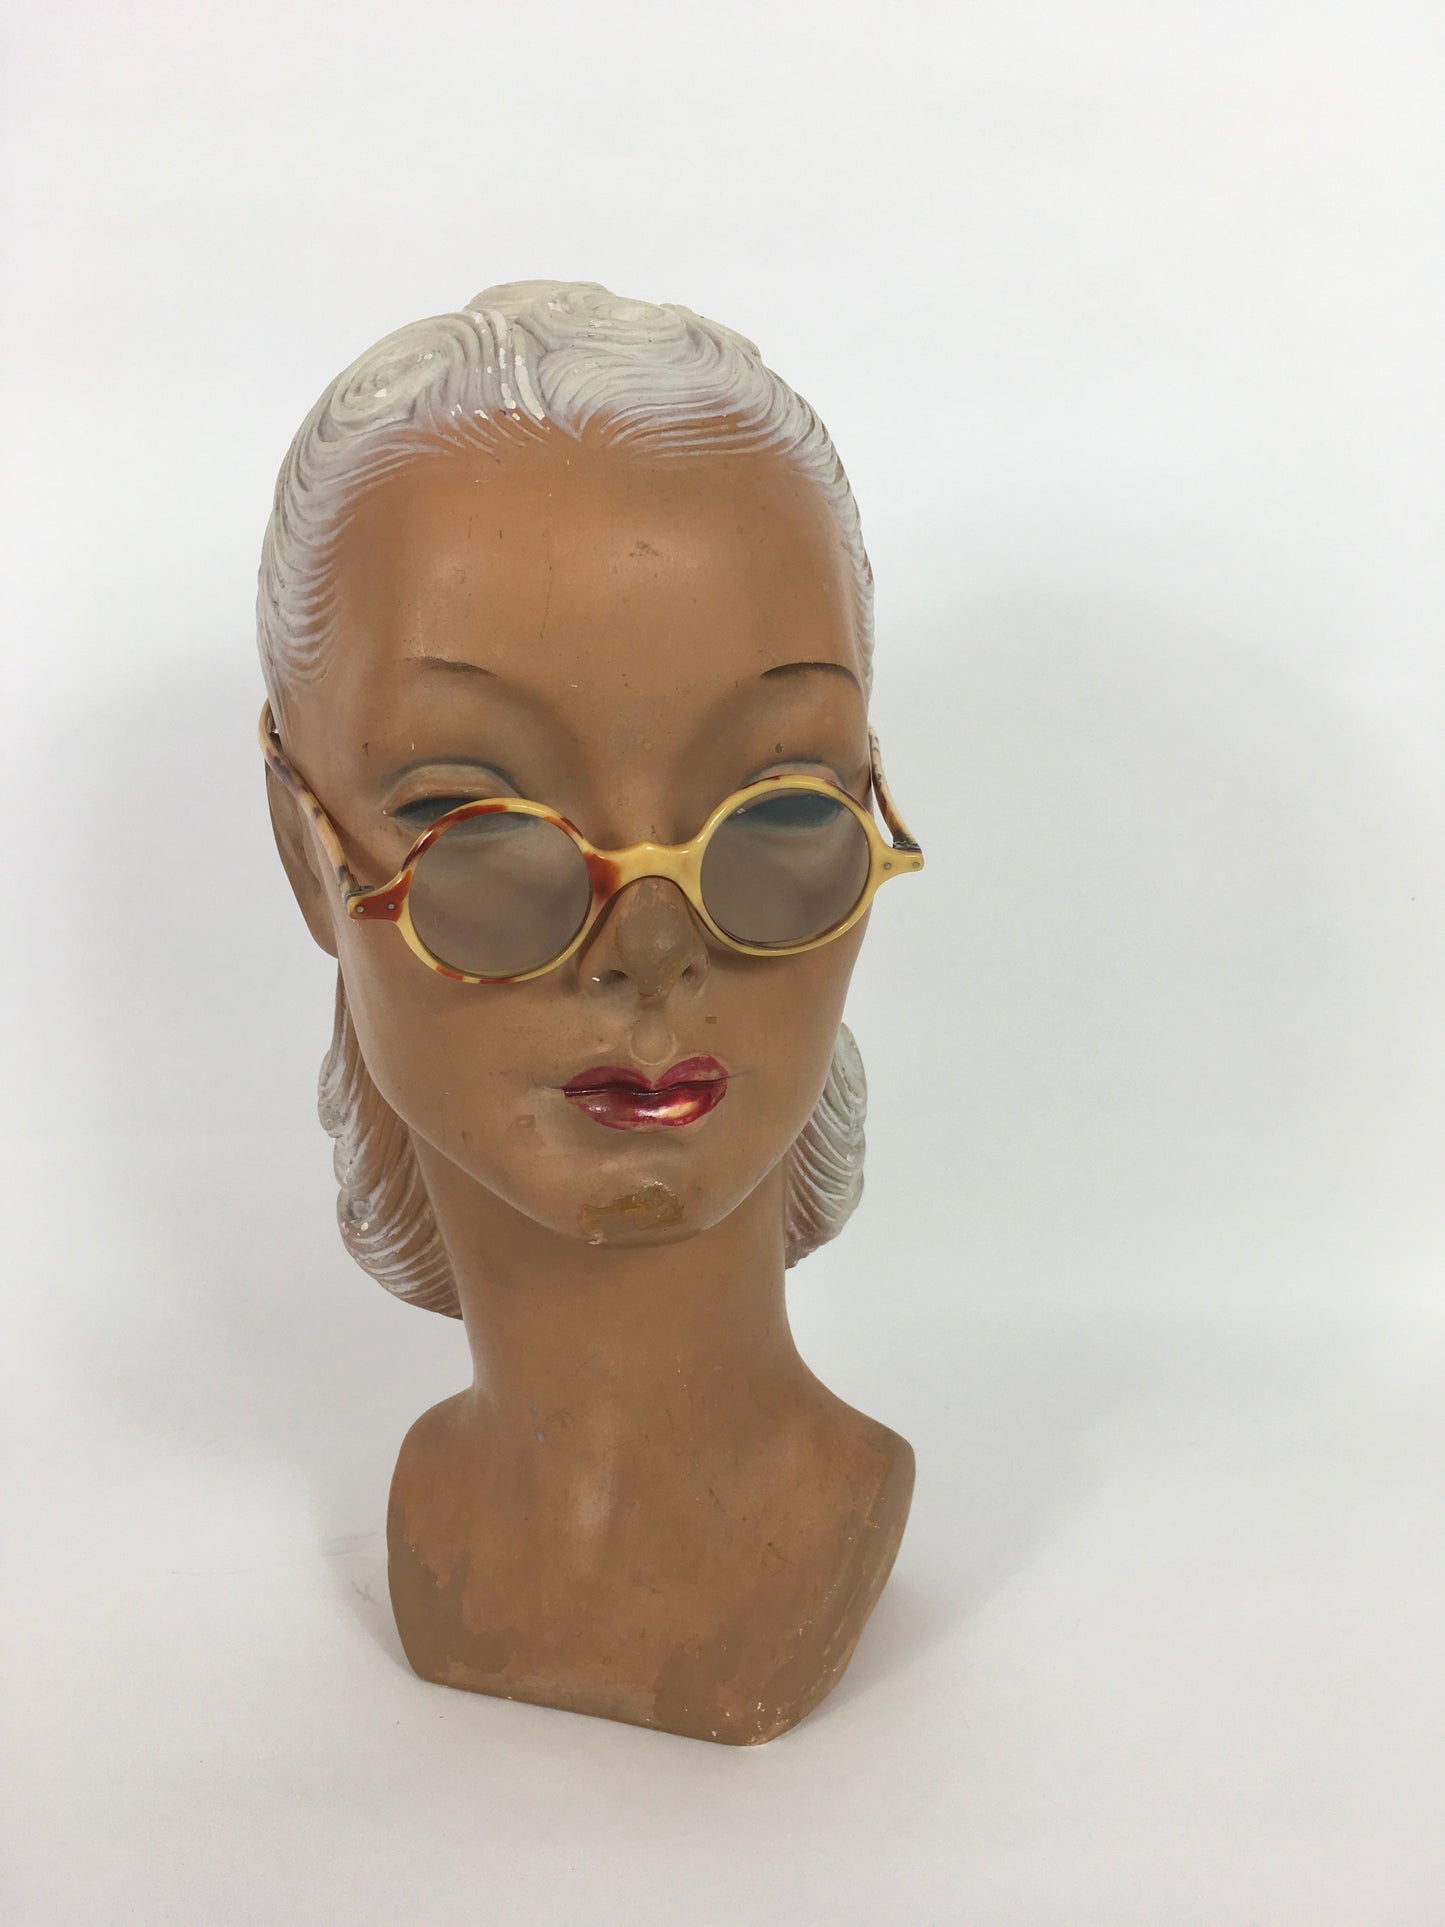 Original 1930s Sunglasses - In a Lovely Cream and Brown 2 Tone in a Small Classic Frame